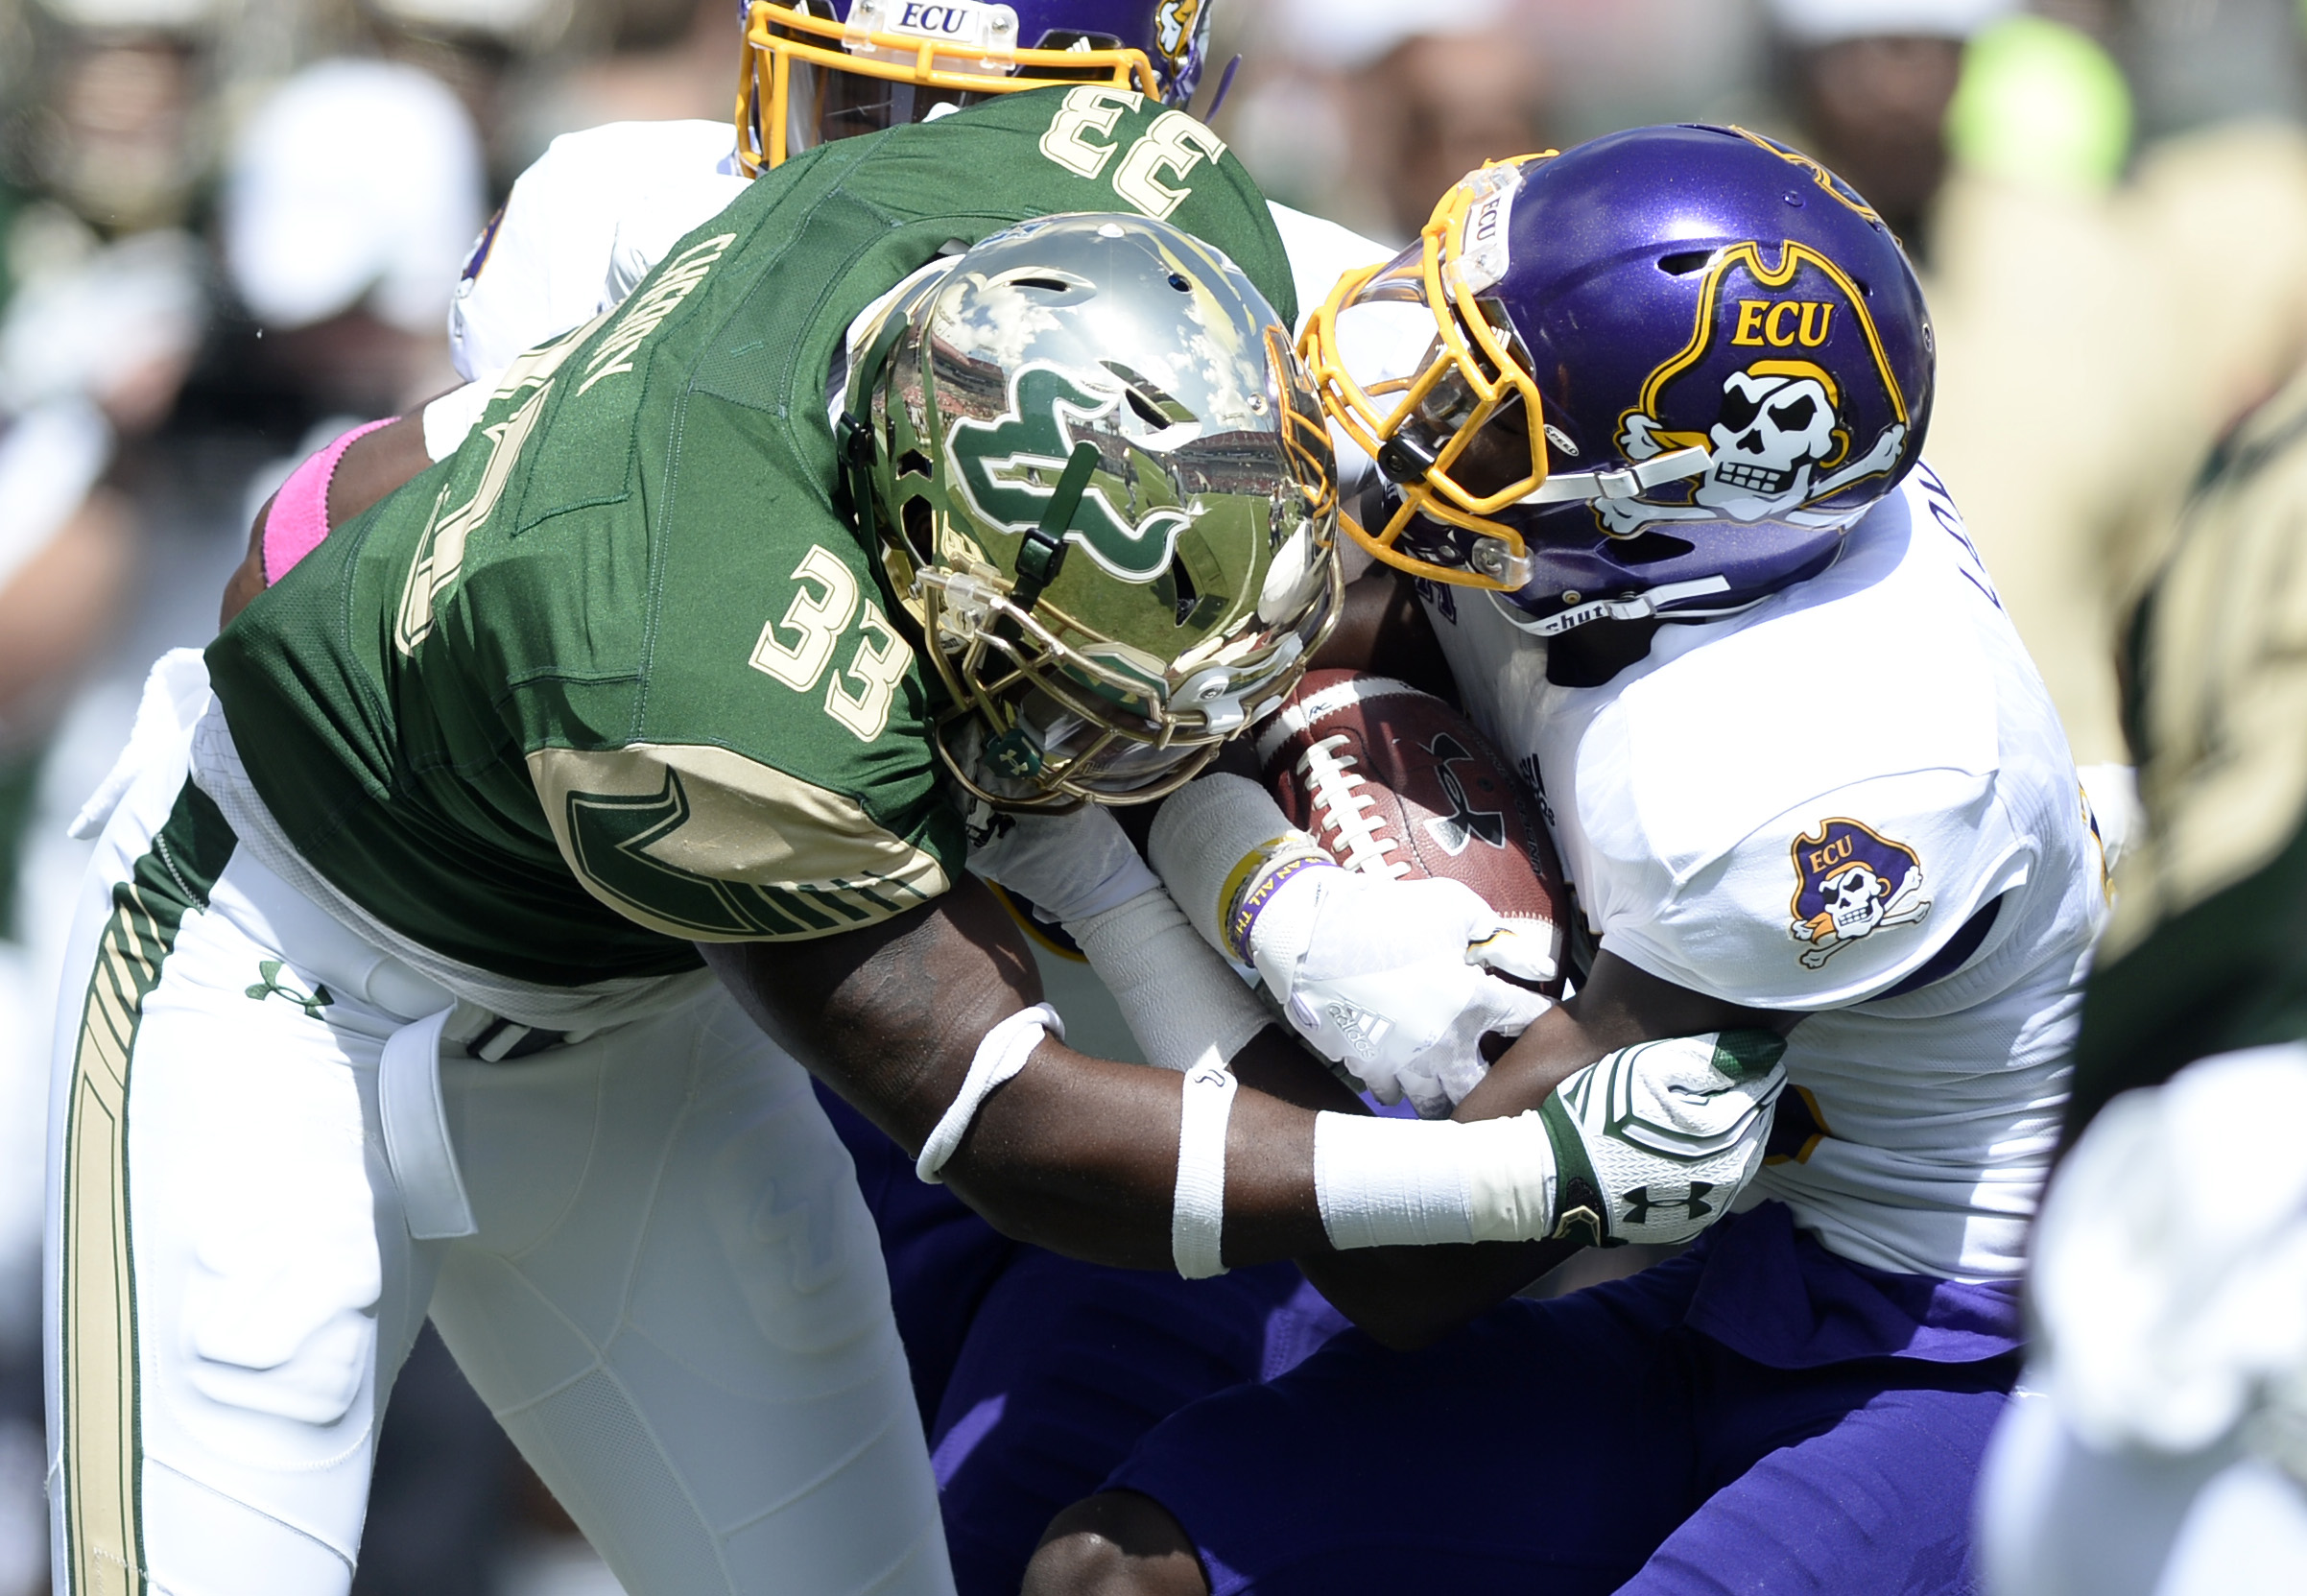 USF football: Five things to know about East Carolina